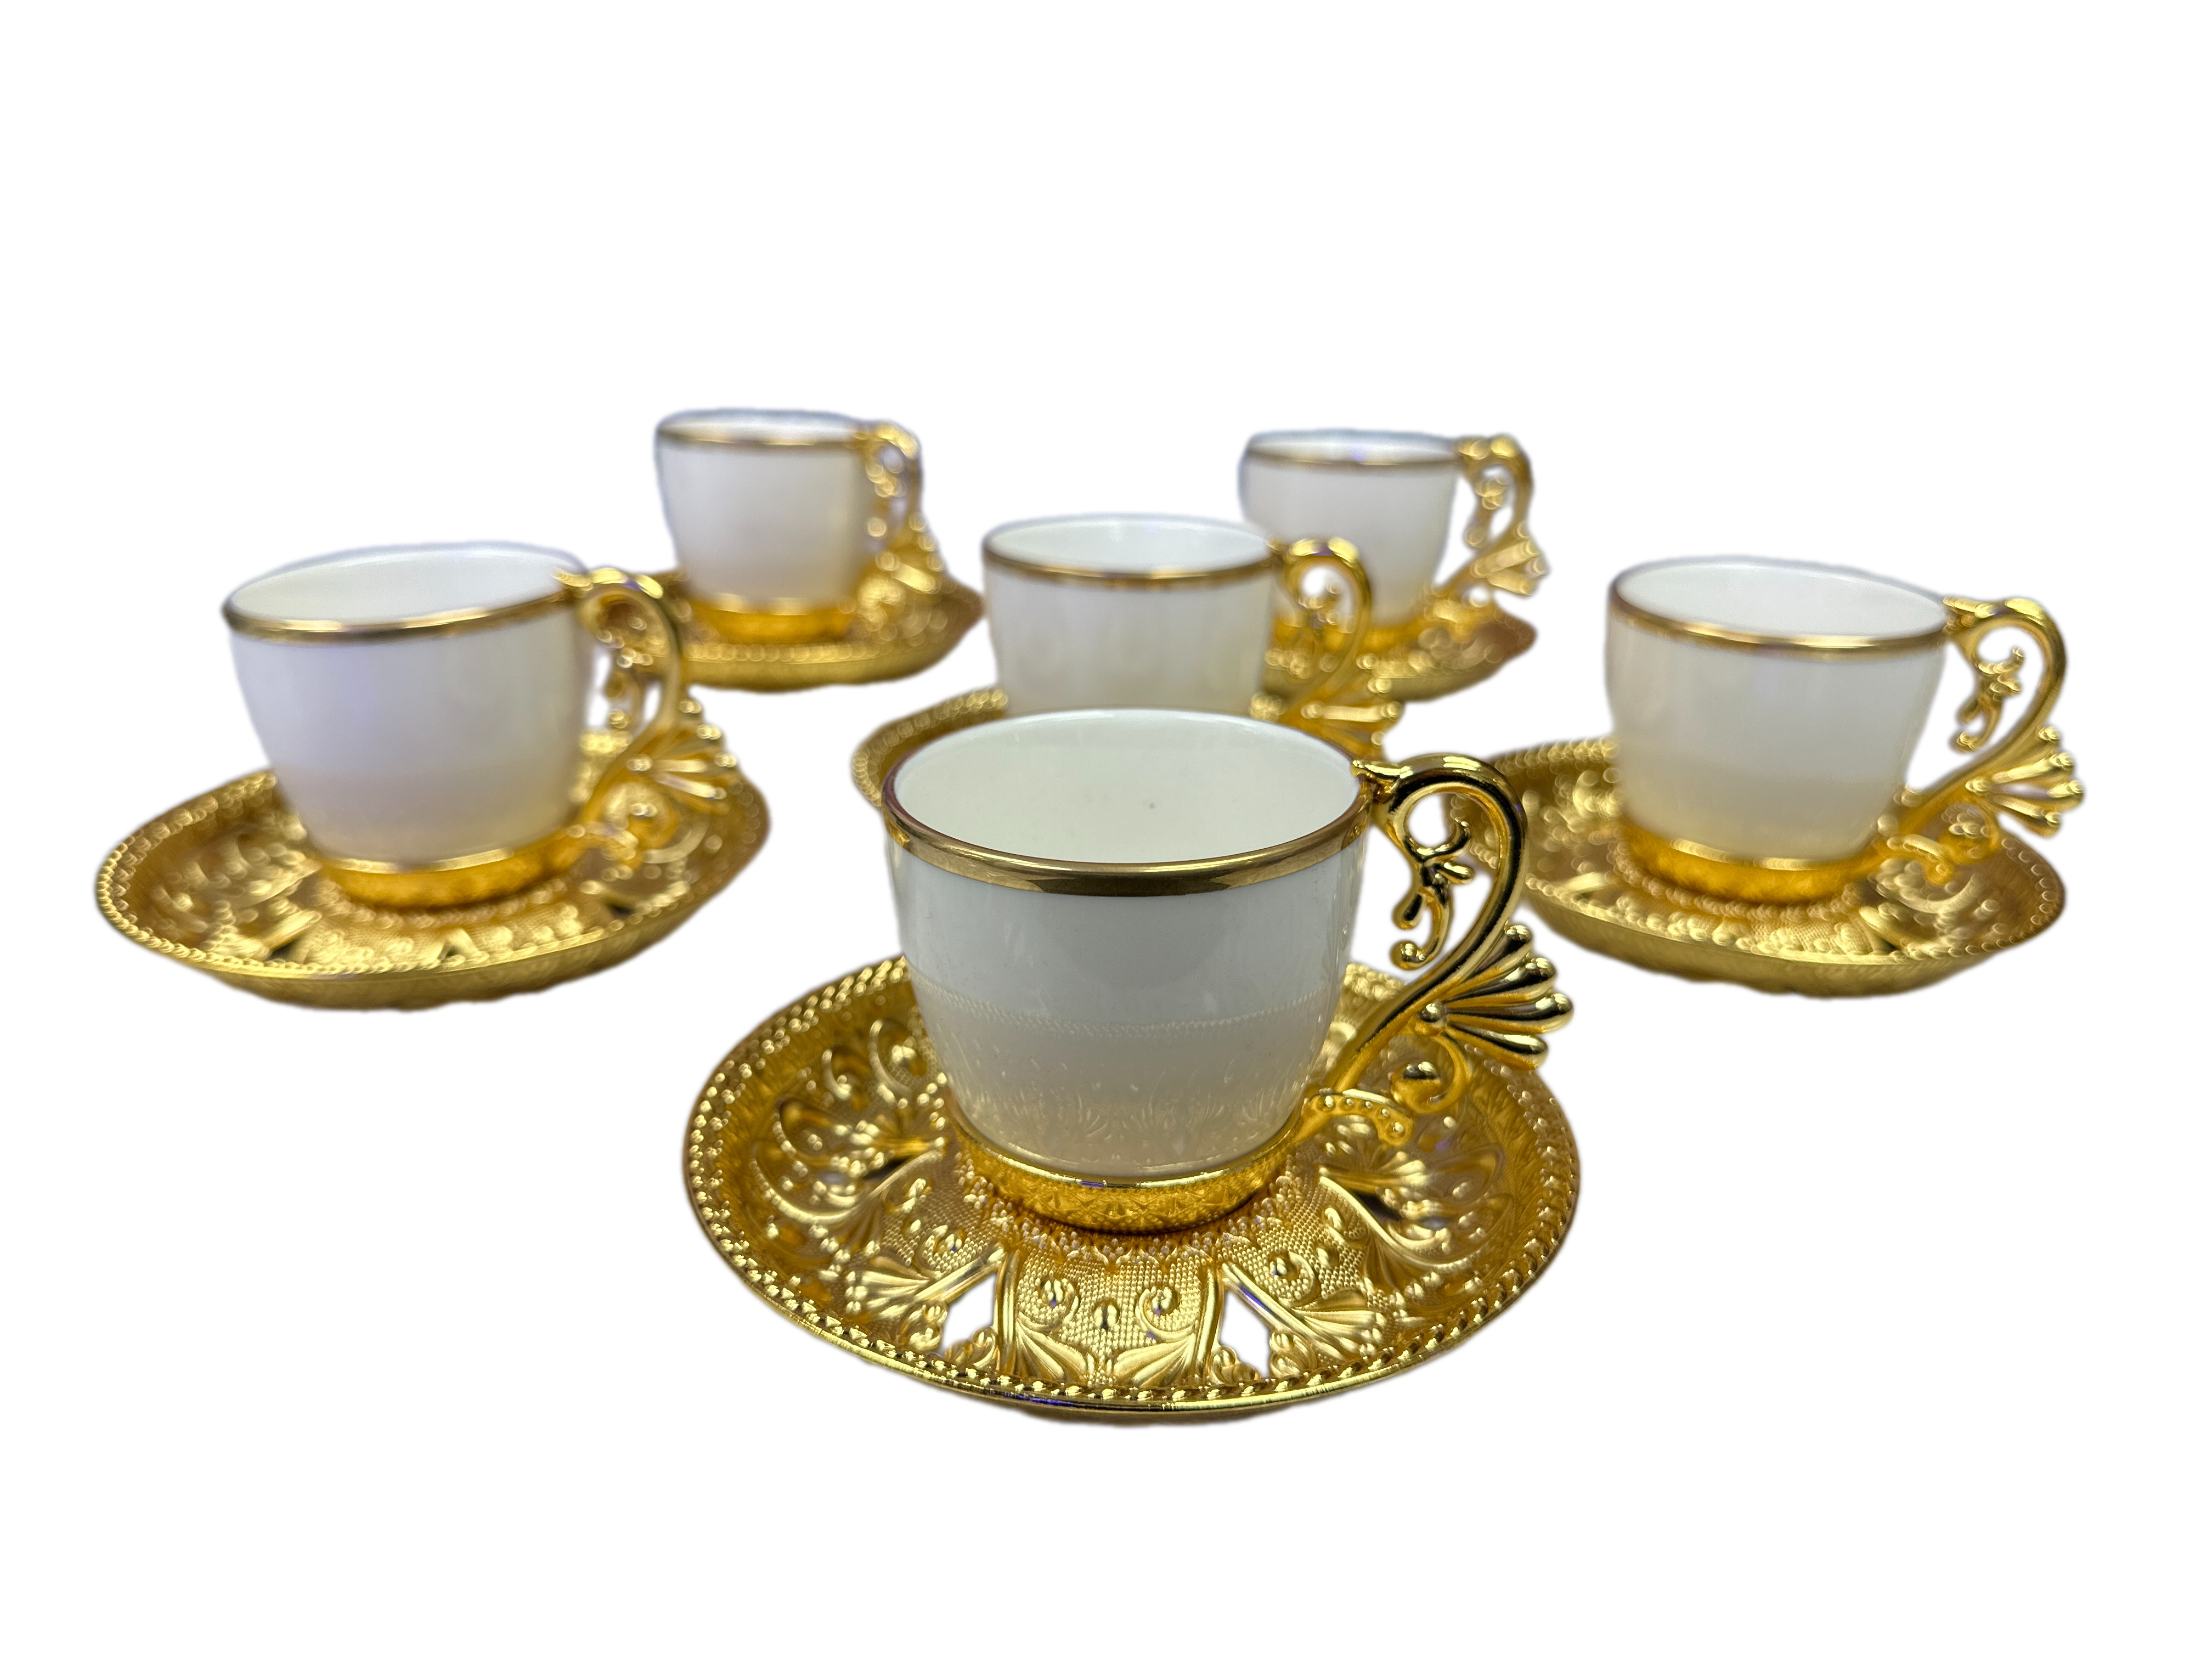 Arabic & Turkish coffee cups sets of 6 with gold stylish